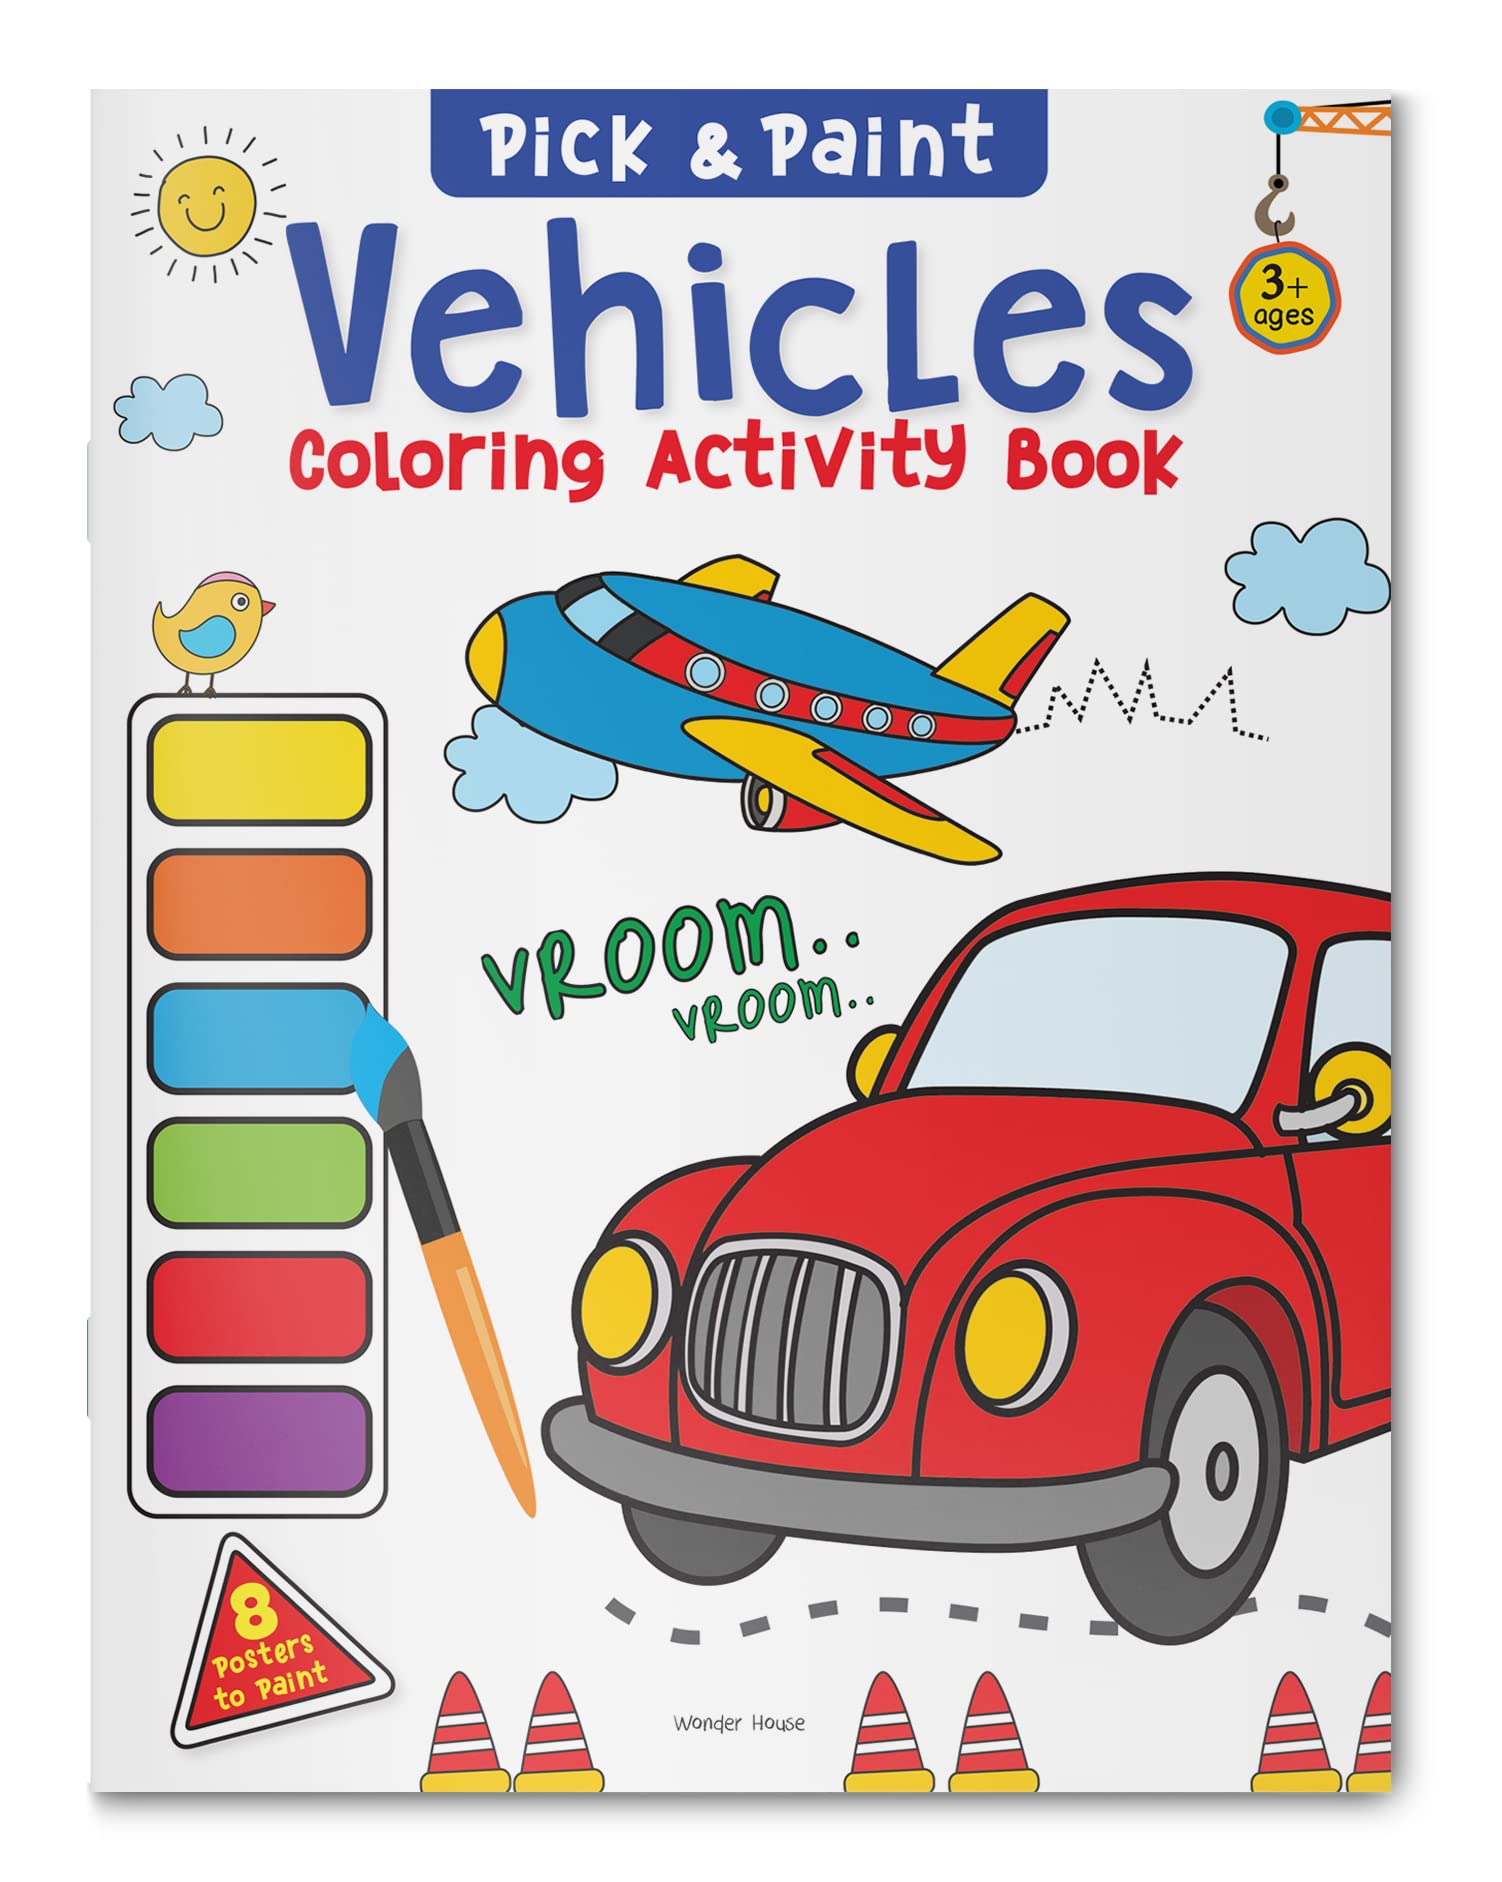 Vehicles: Pick & Paint Coloring Activity Book For Kids